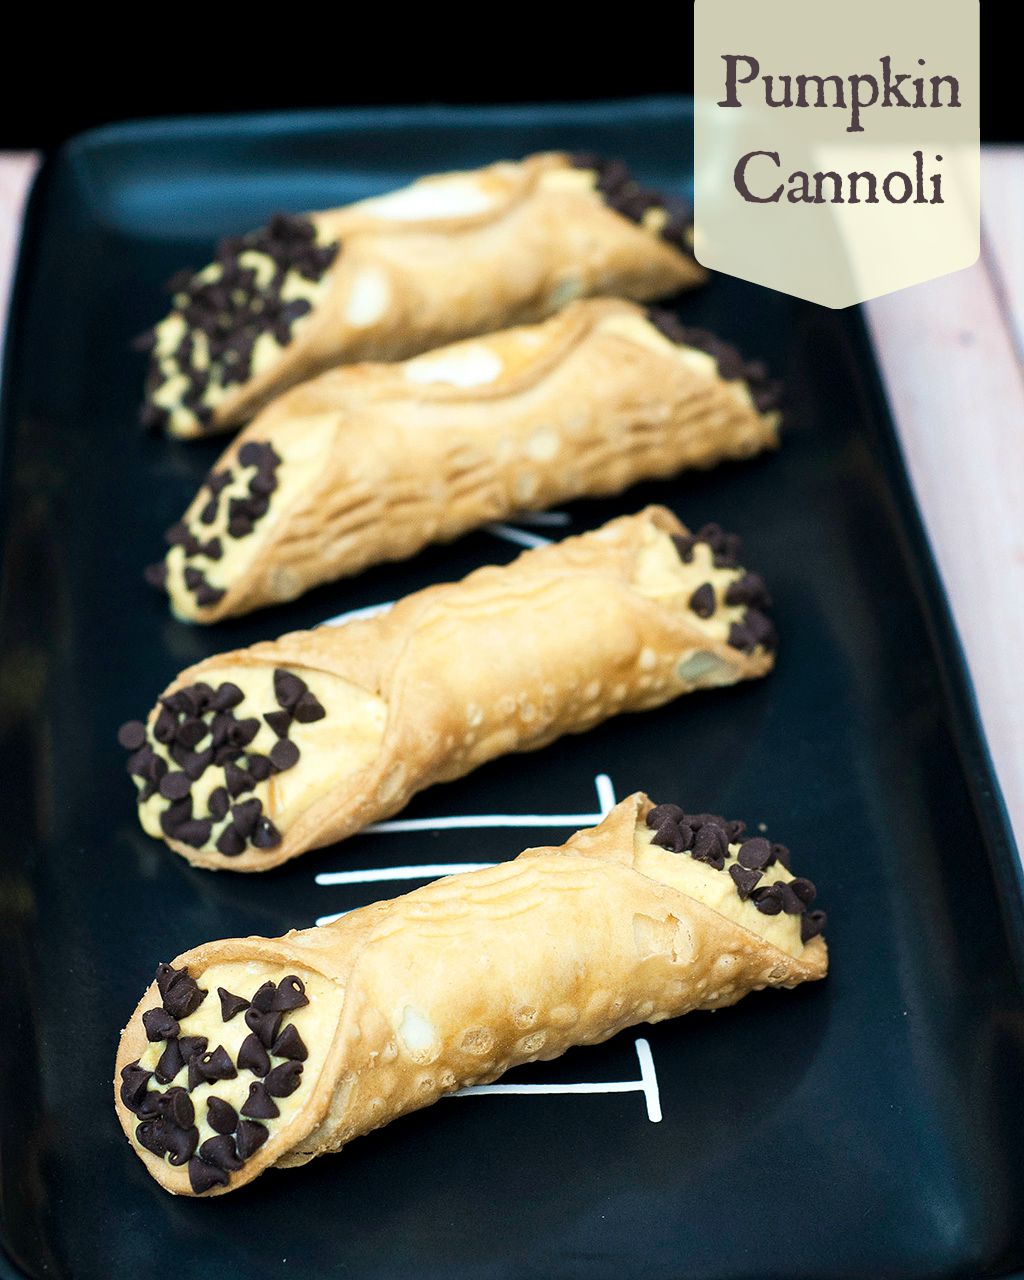 These aren't your traditional cannoli — pumpkin cannoli combines mascarpone, pumpkin and spices for an easy yet impressive no-bake dessert. #PumpkinWeek